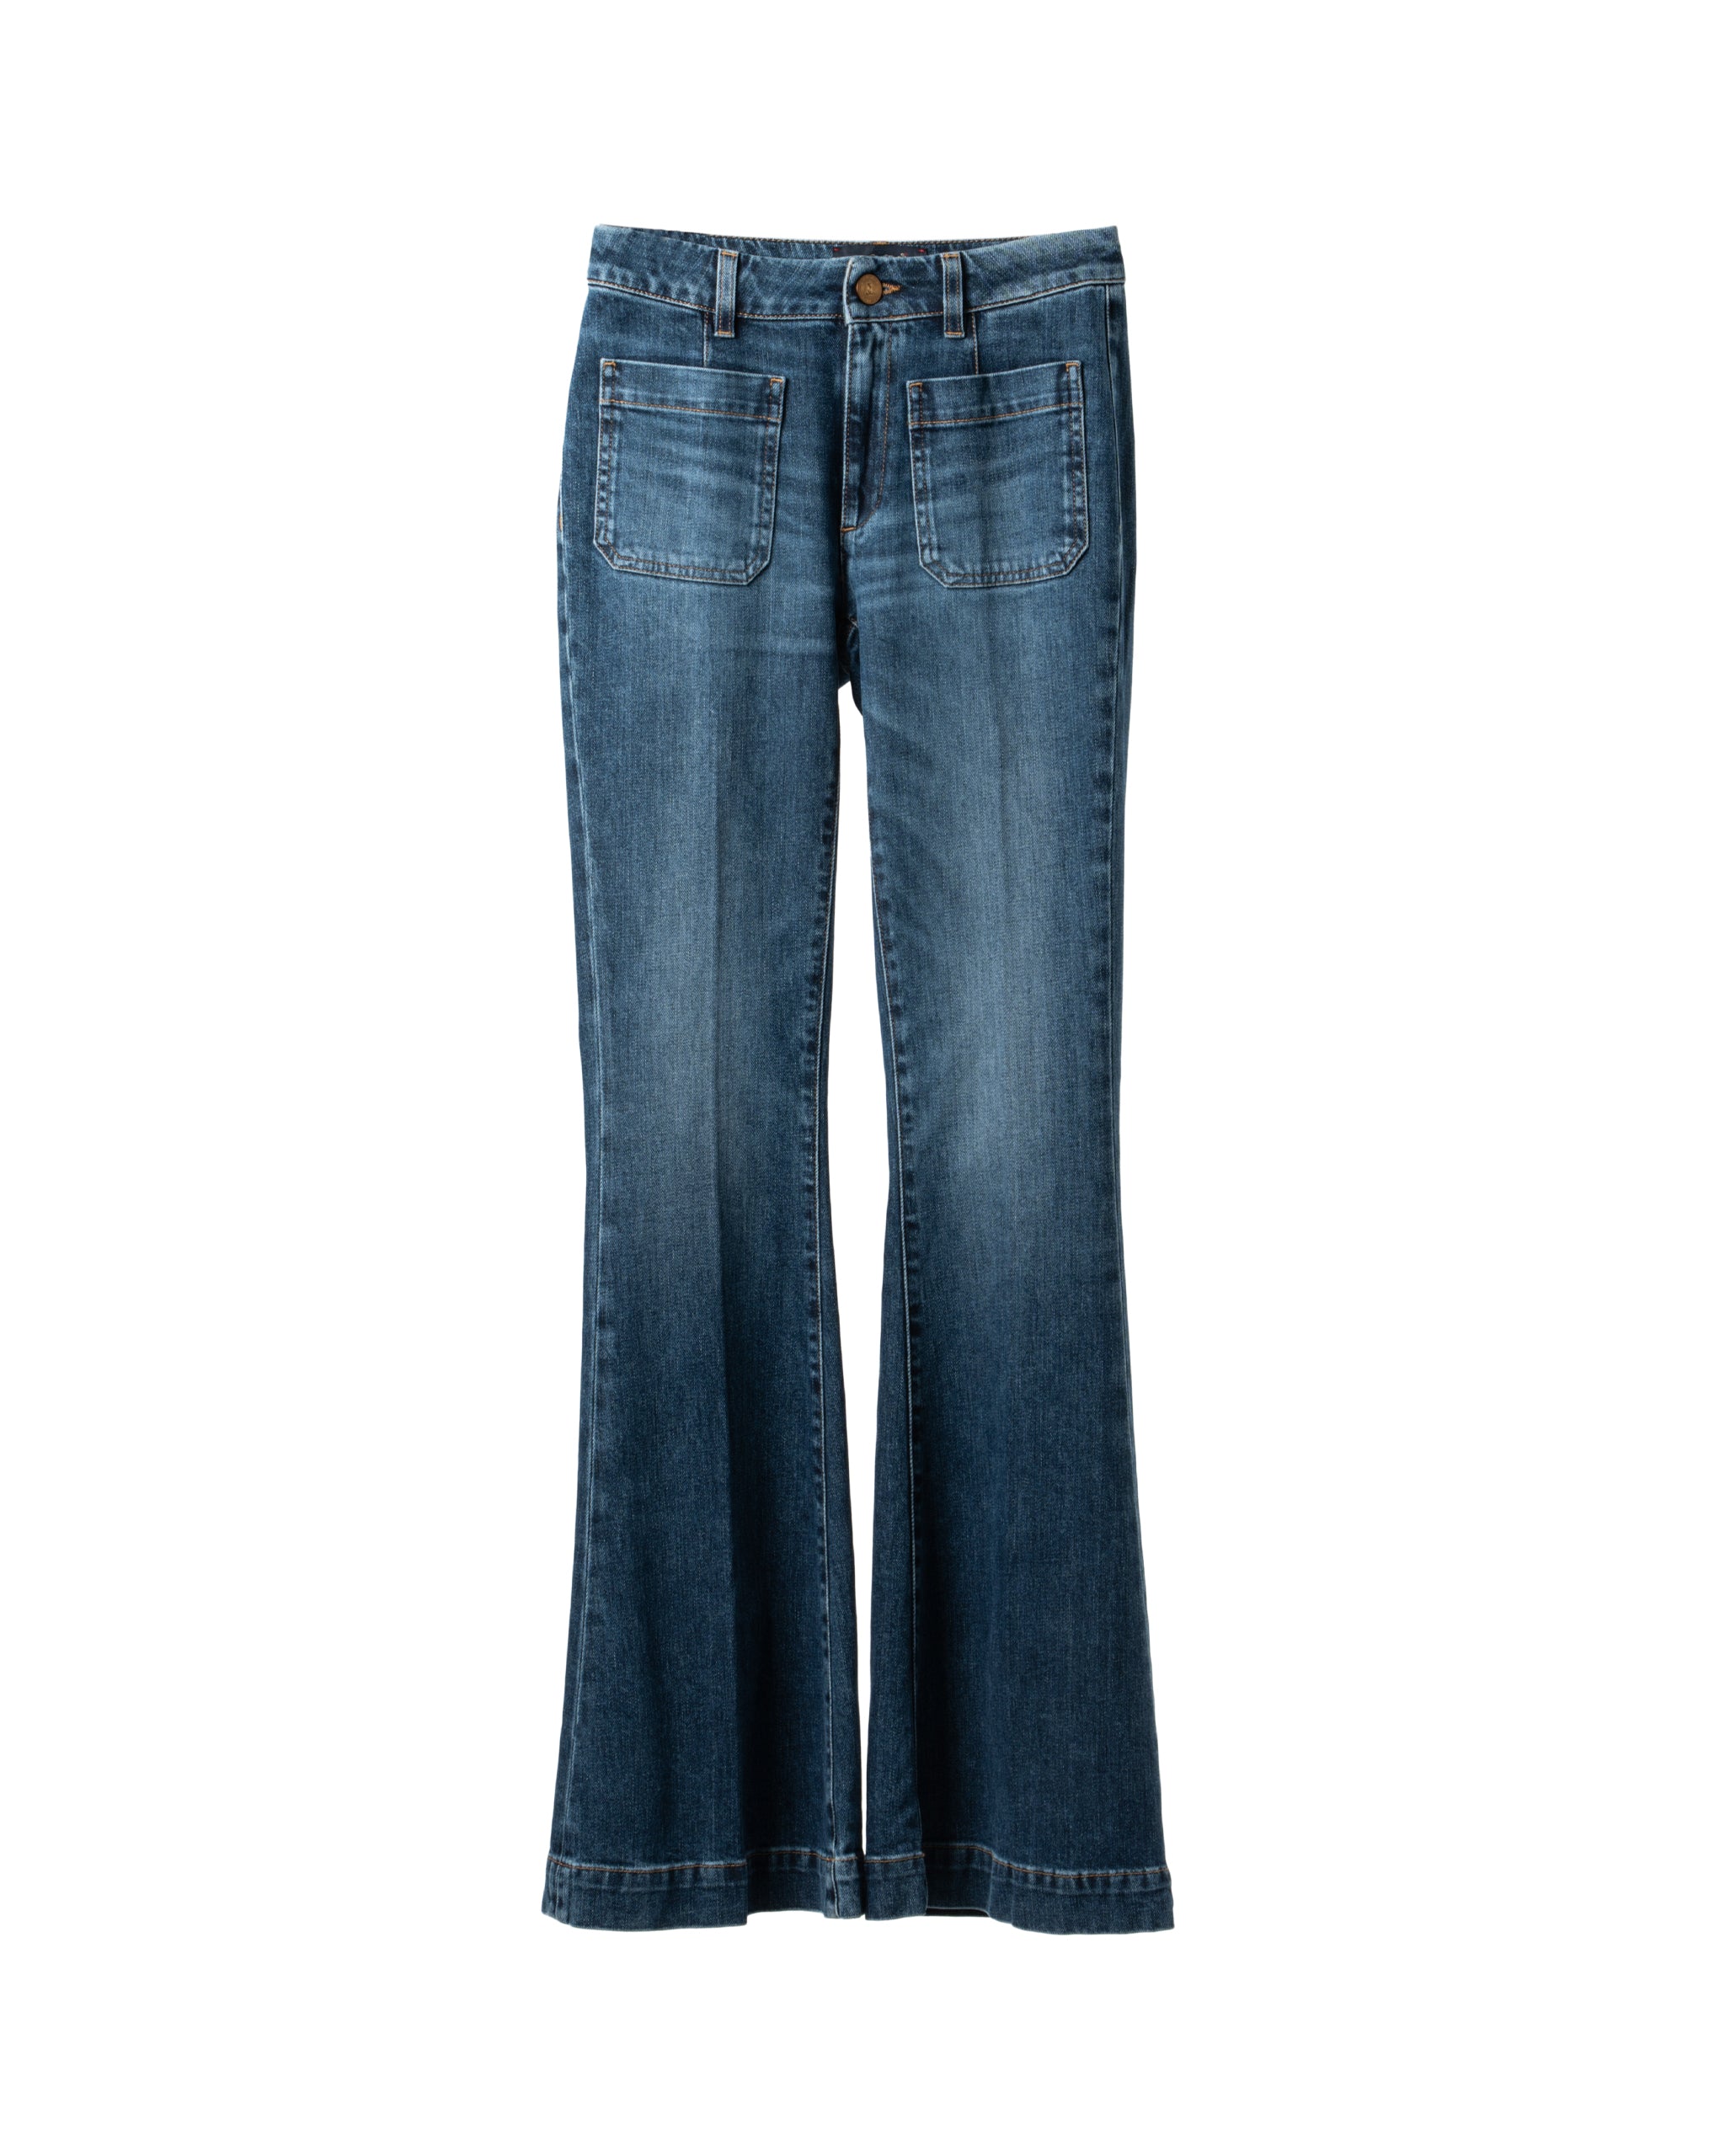 ICON FLAIR DENIM FIT JEANS